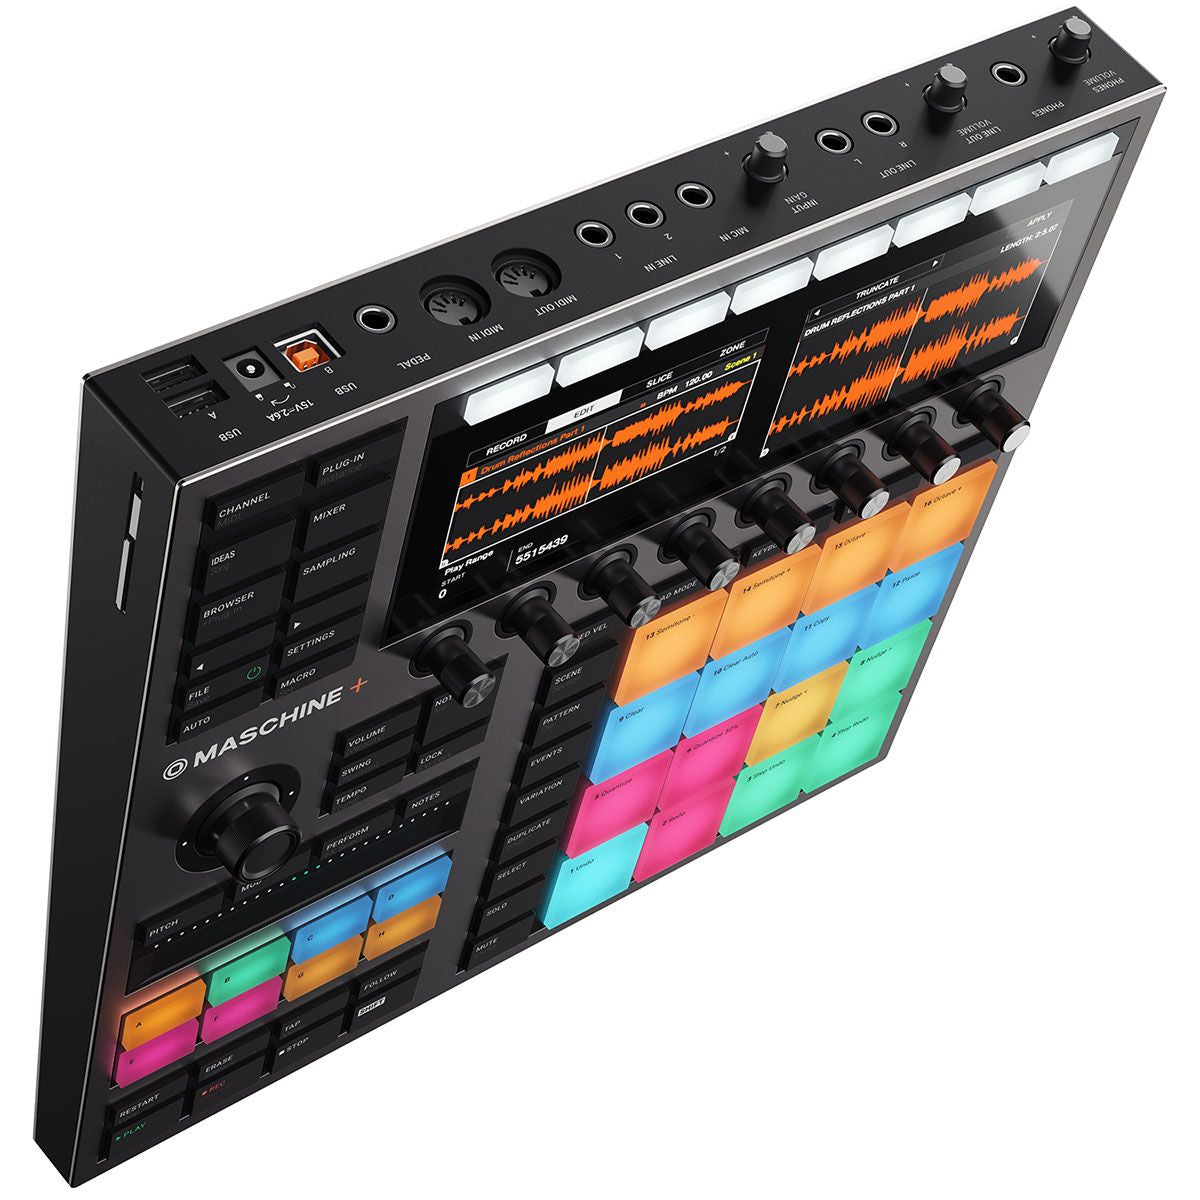 Native Instruments Maschine+ Standalone Production System